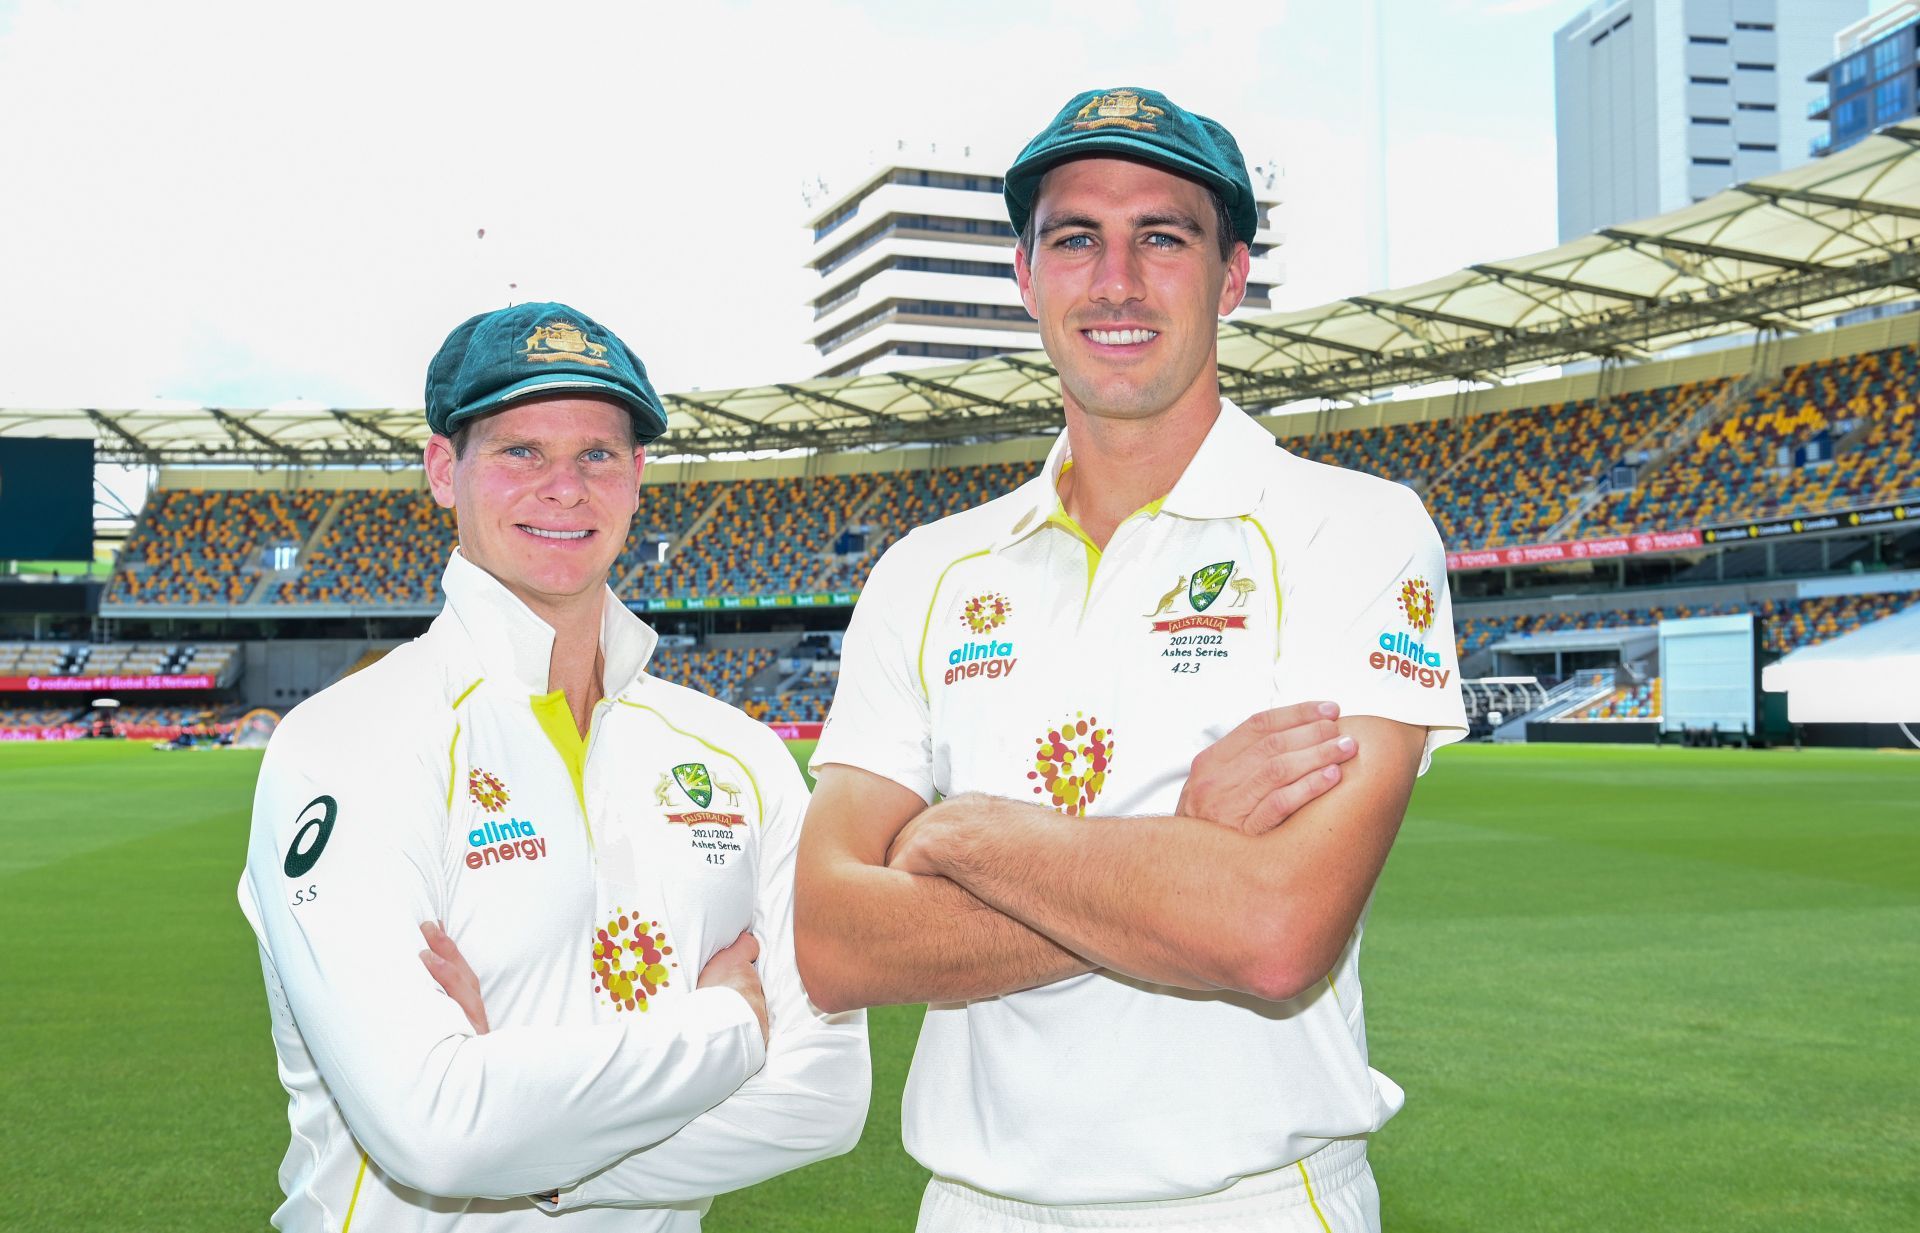 Pat Cummins (right) will lead Australia in Ashes 2021, with Steve Smith as his deputy.